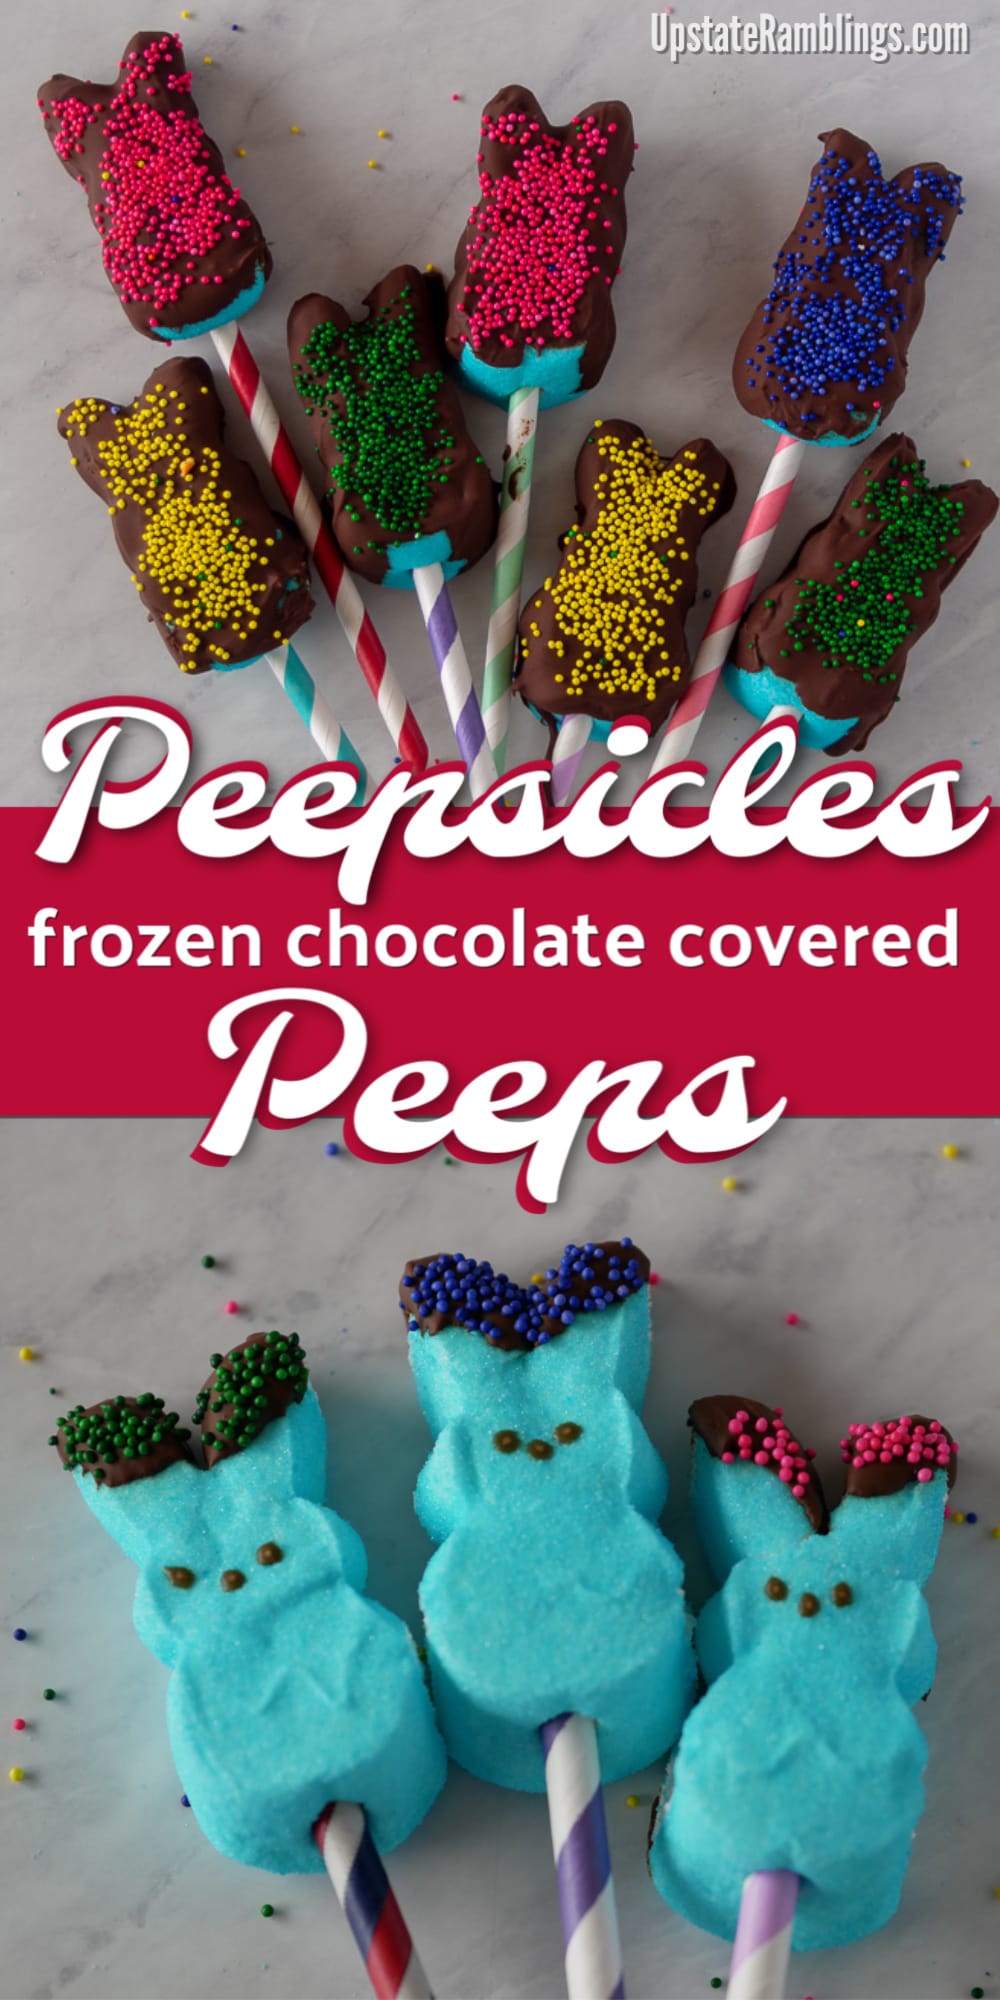 Chocolate covered marshmallow pops are a cute Easter recipe with peeps which is made from chocolate dipped frozen Peeps. This Peeps recipe is quick and easy to make and sure to be a hit with kids of all ages. Can you freeze Peeps? Find out how! #peeps #easter #marshmallowpops